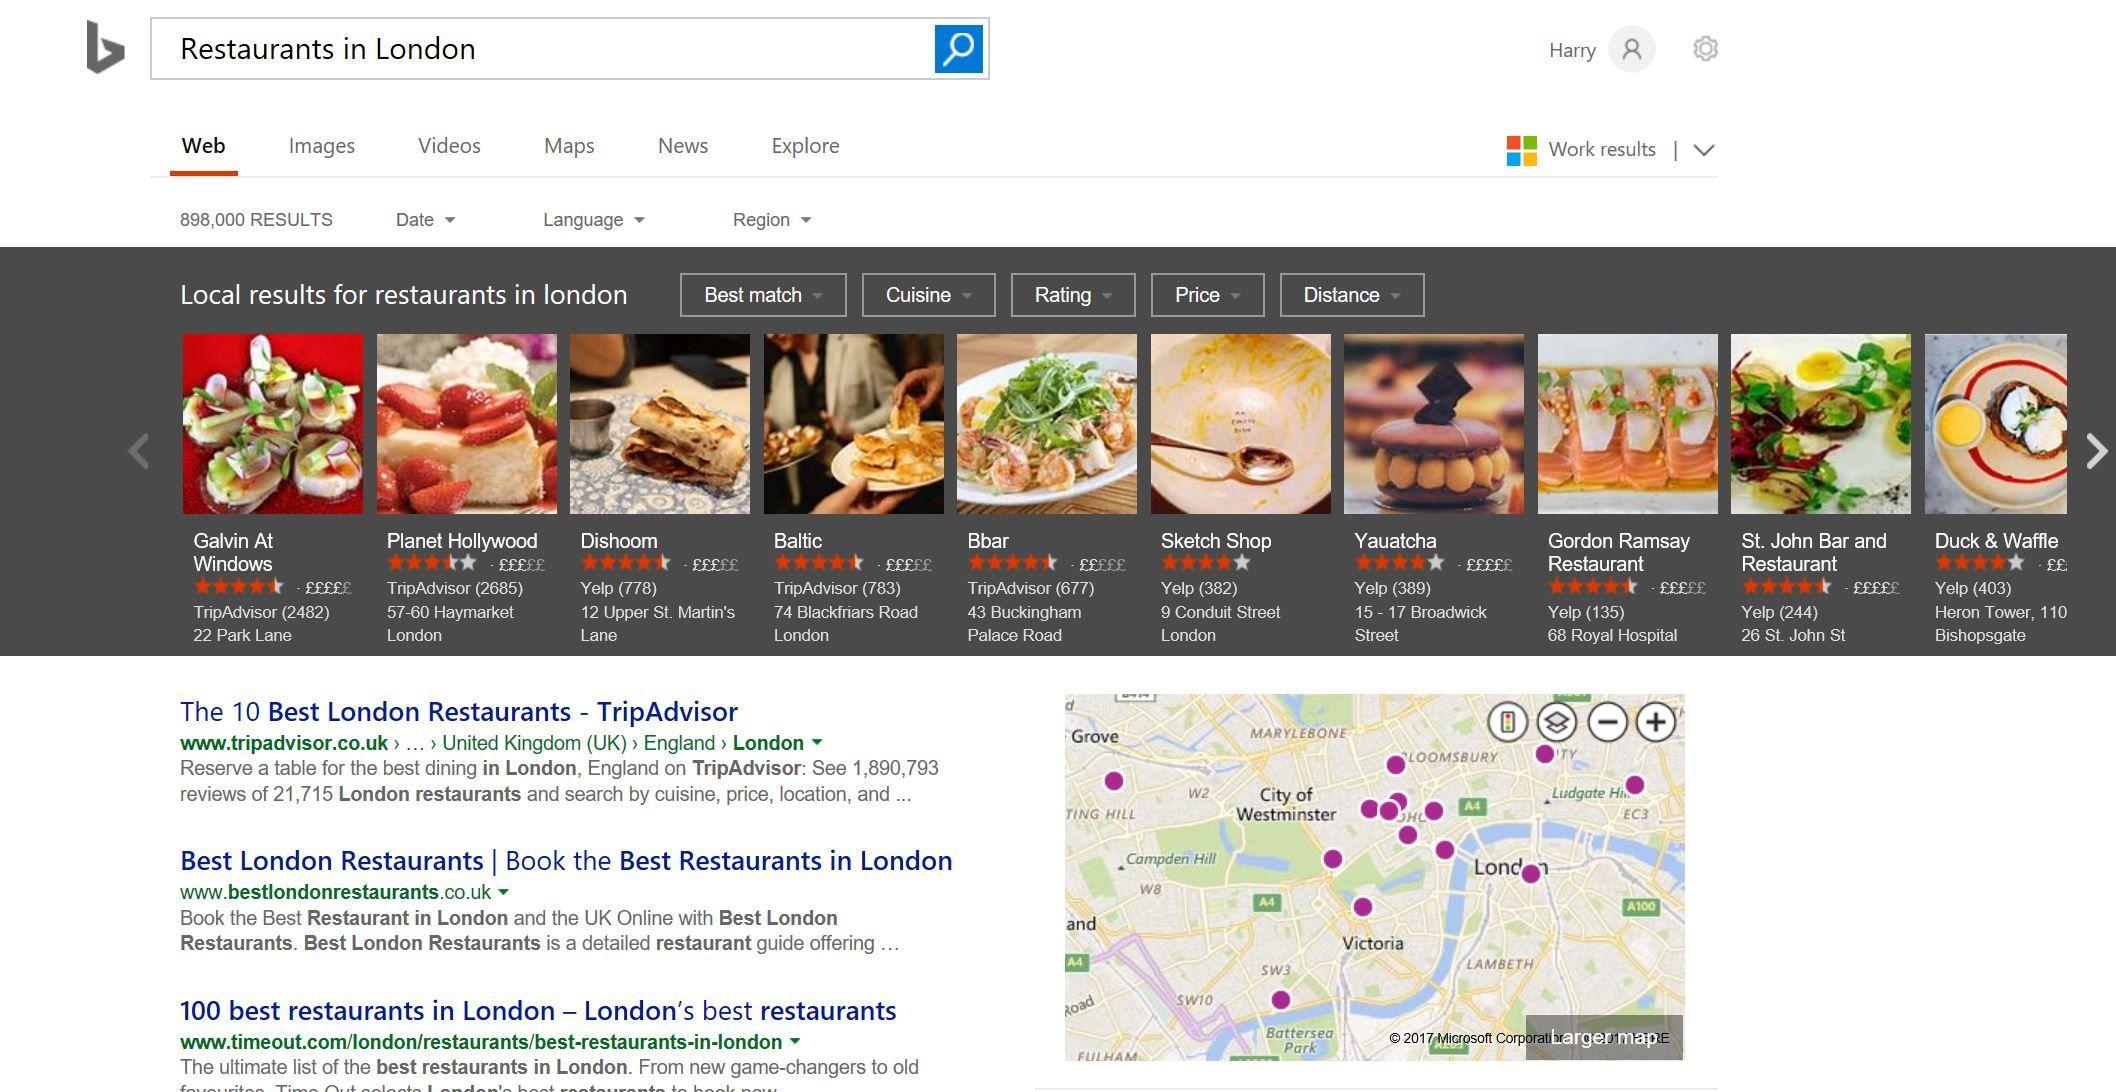 Bing Ultimate Logo - Bing now offers peak traffic times at restaurants for every day